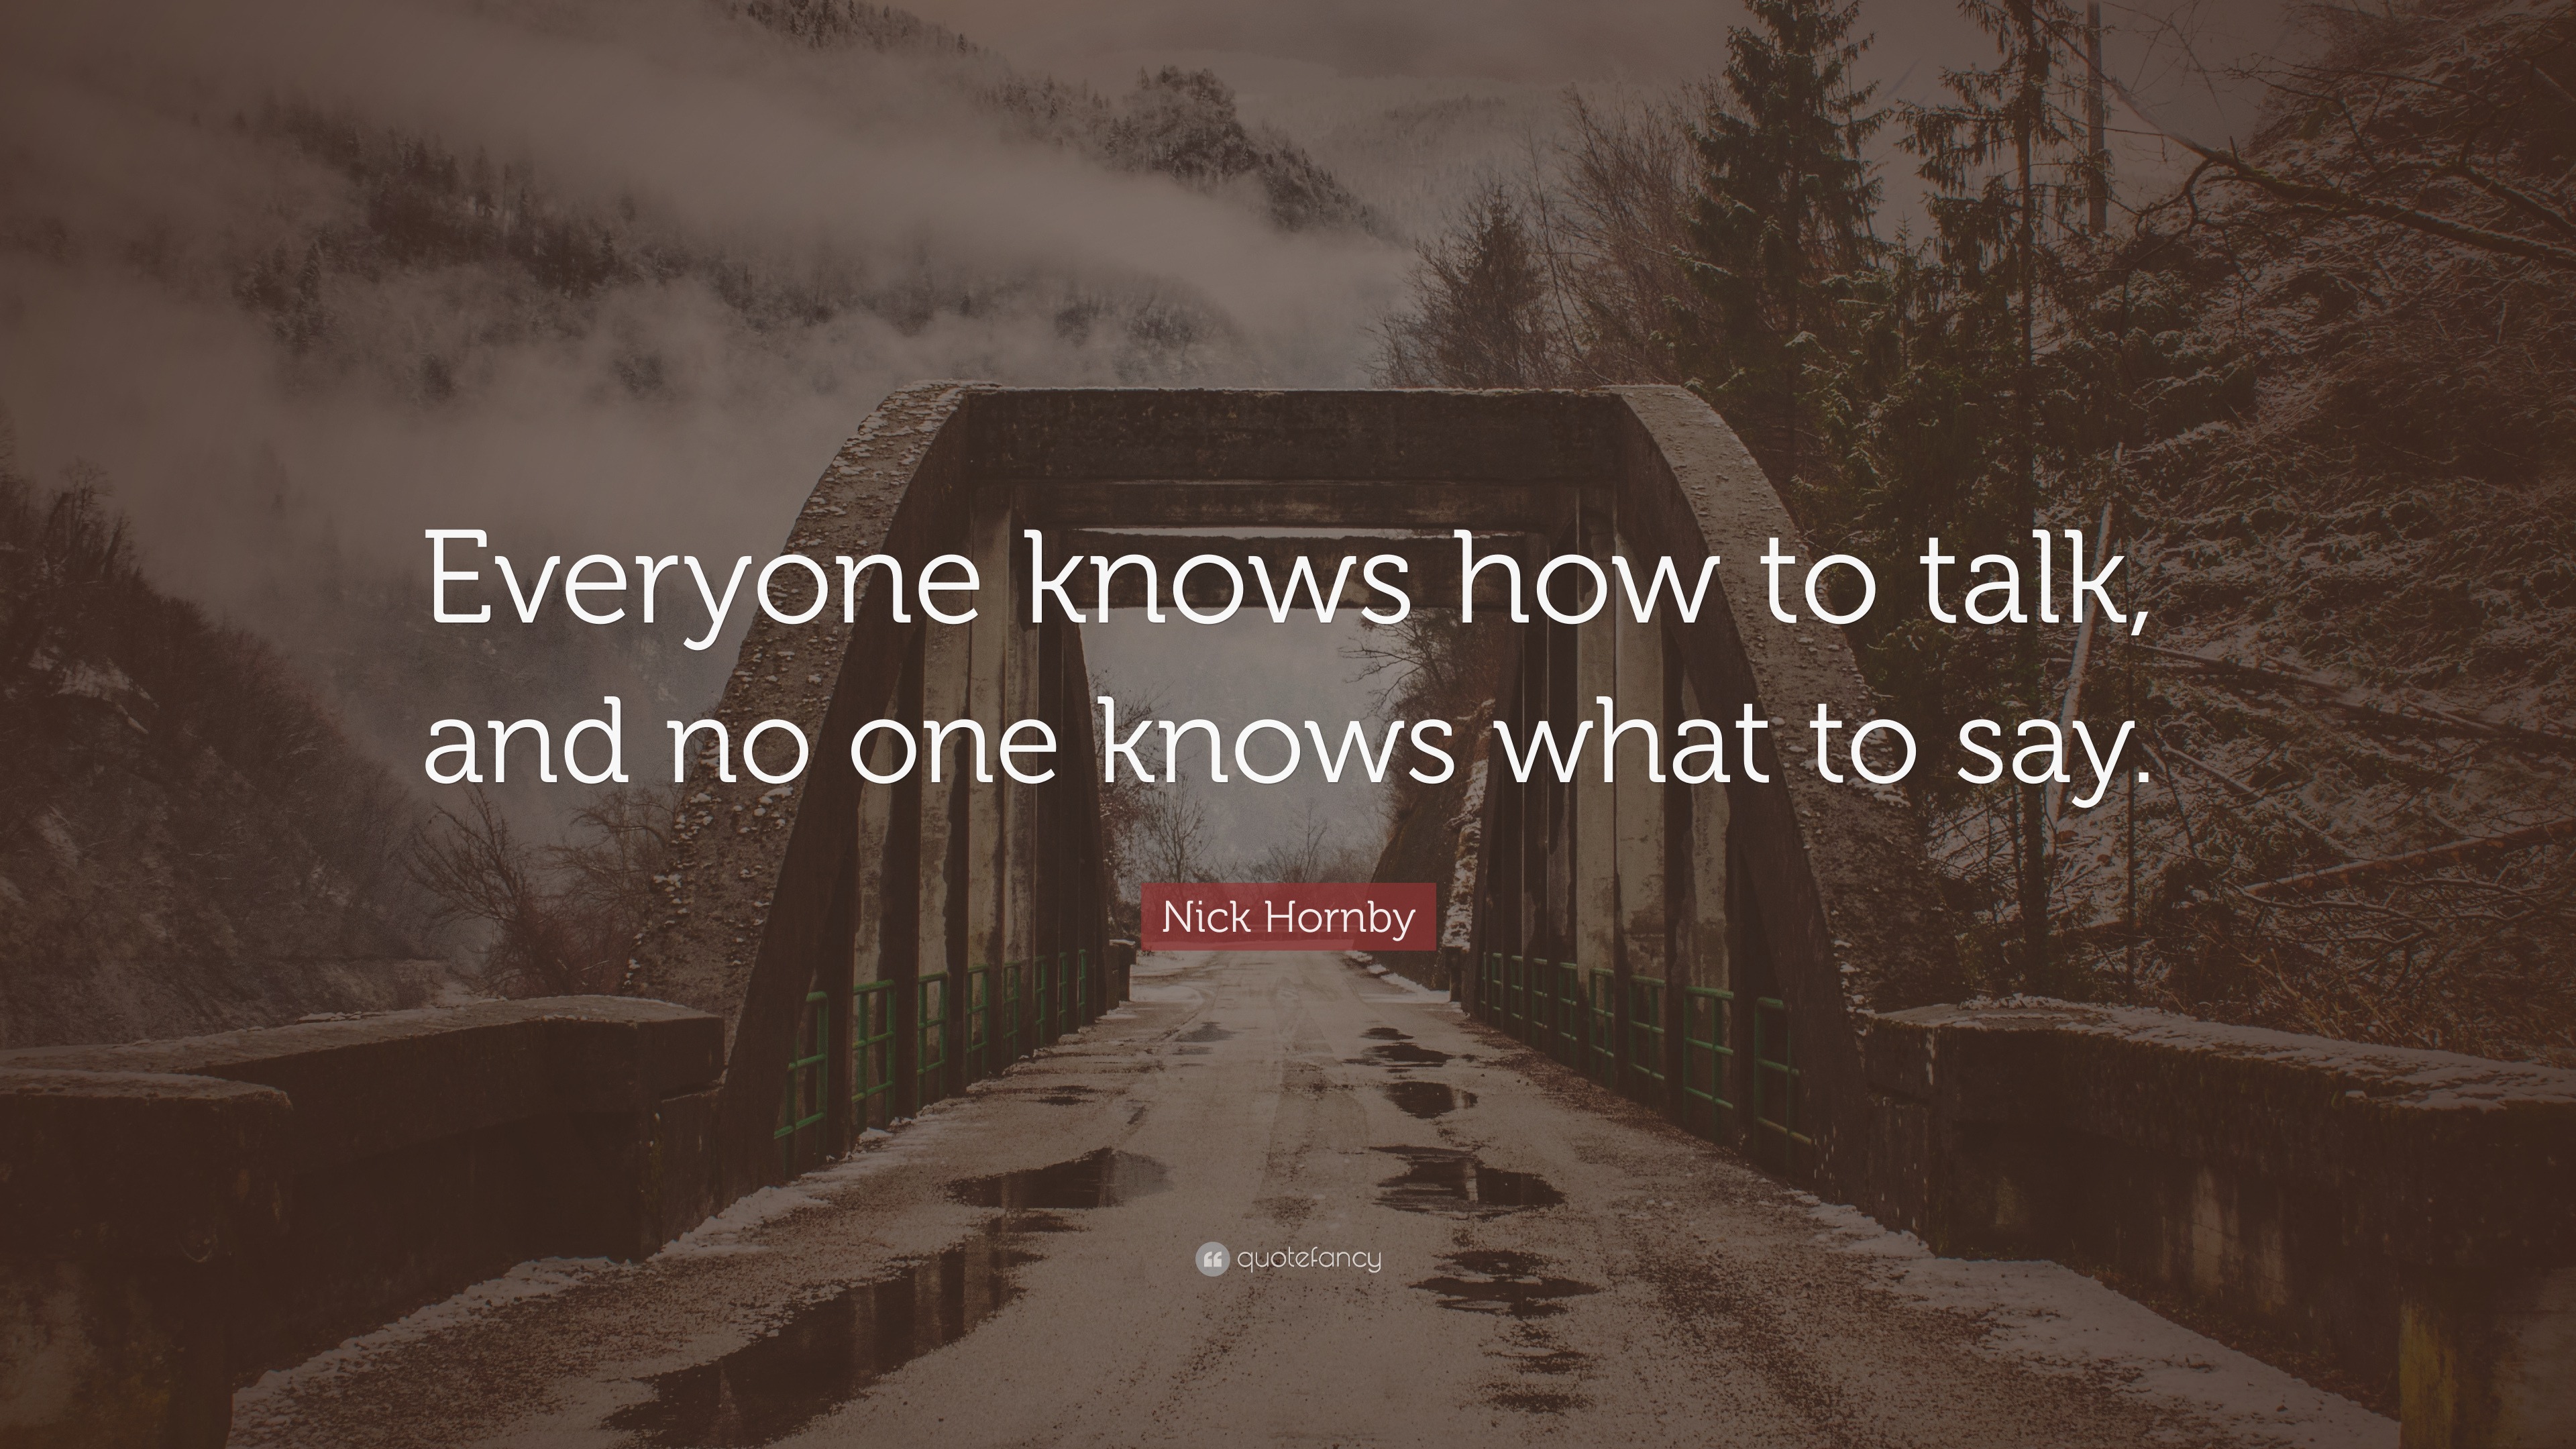 Nick Hornby Quote: “Everyone knows how to talk, and no one knows what